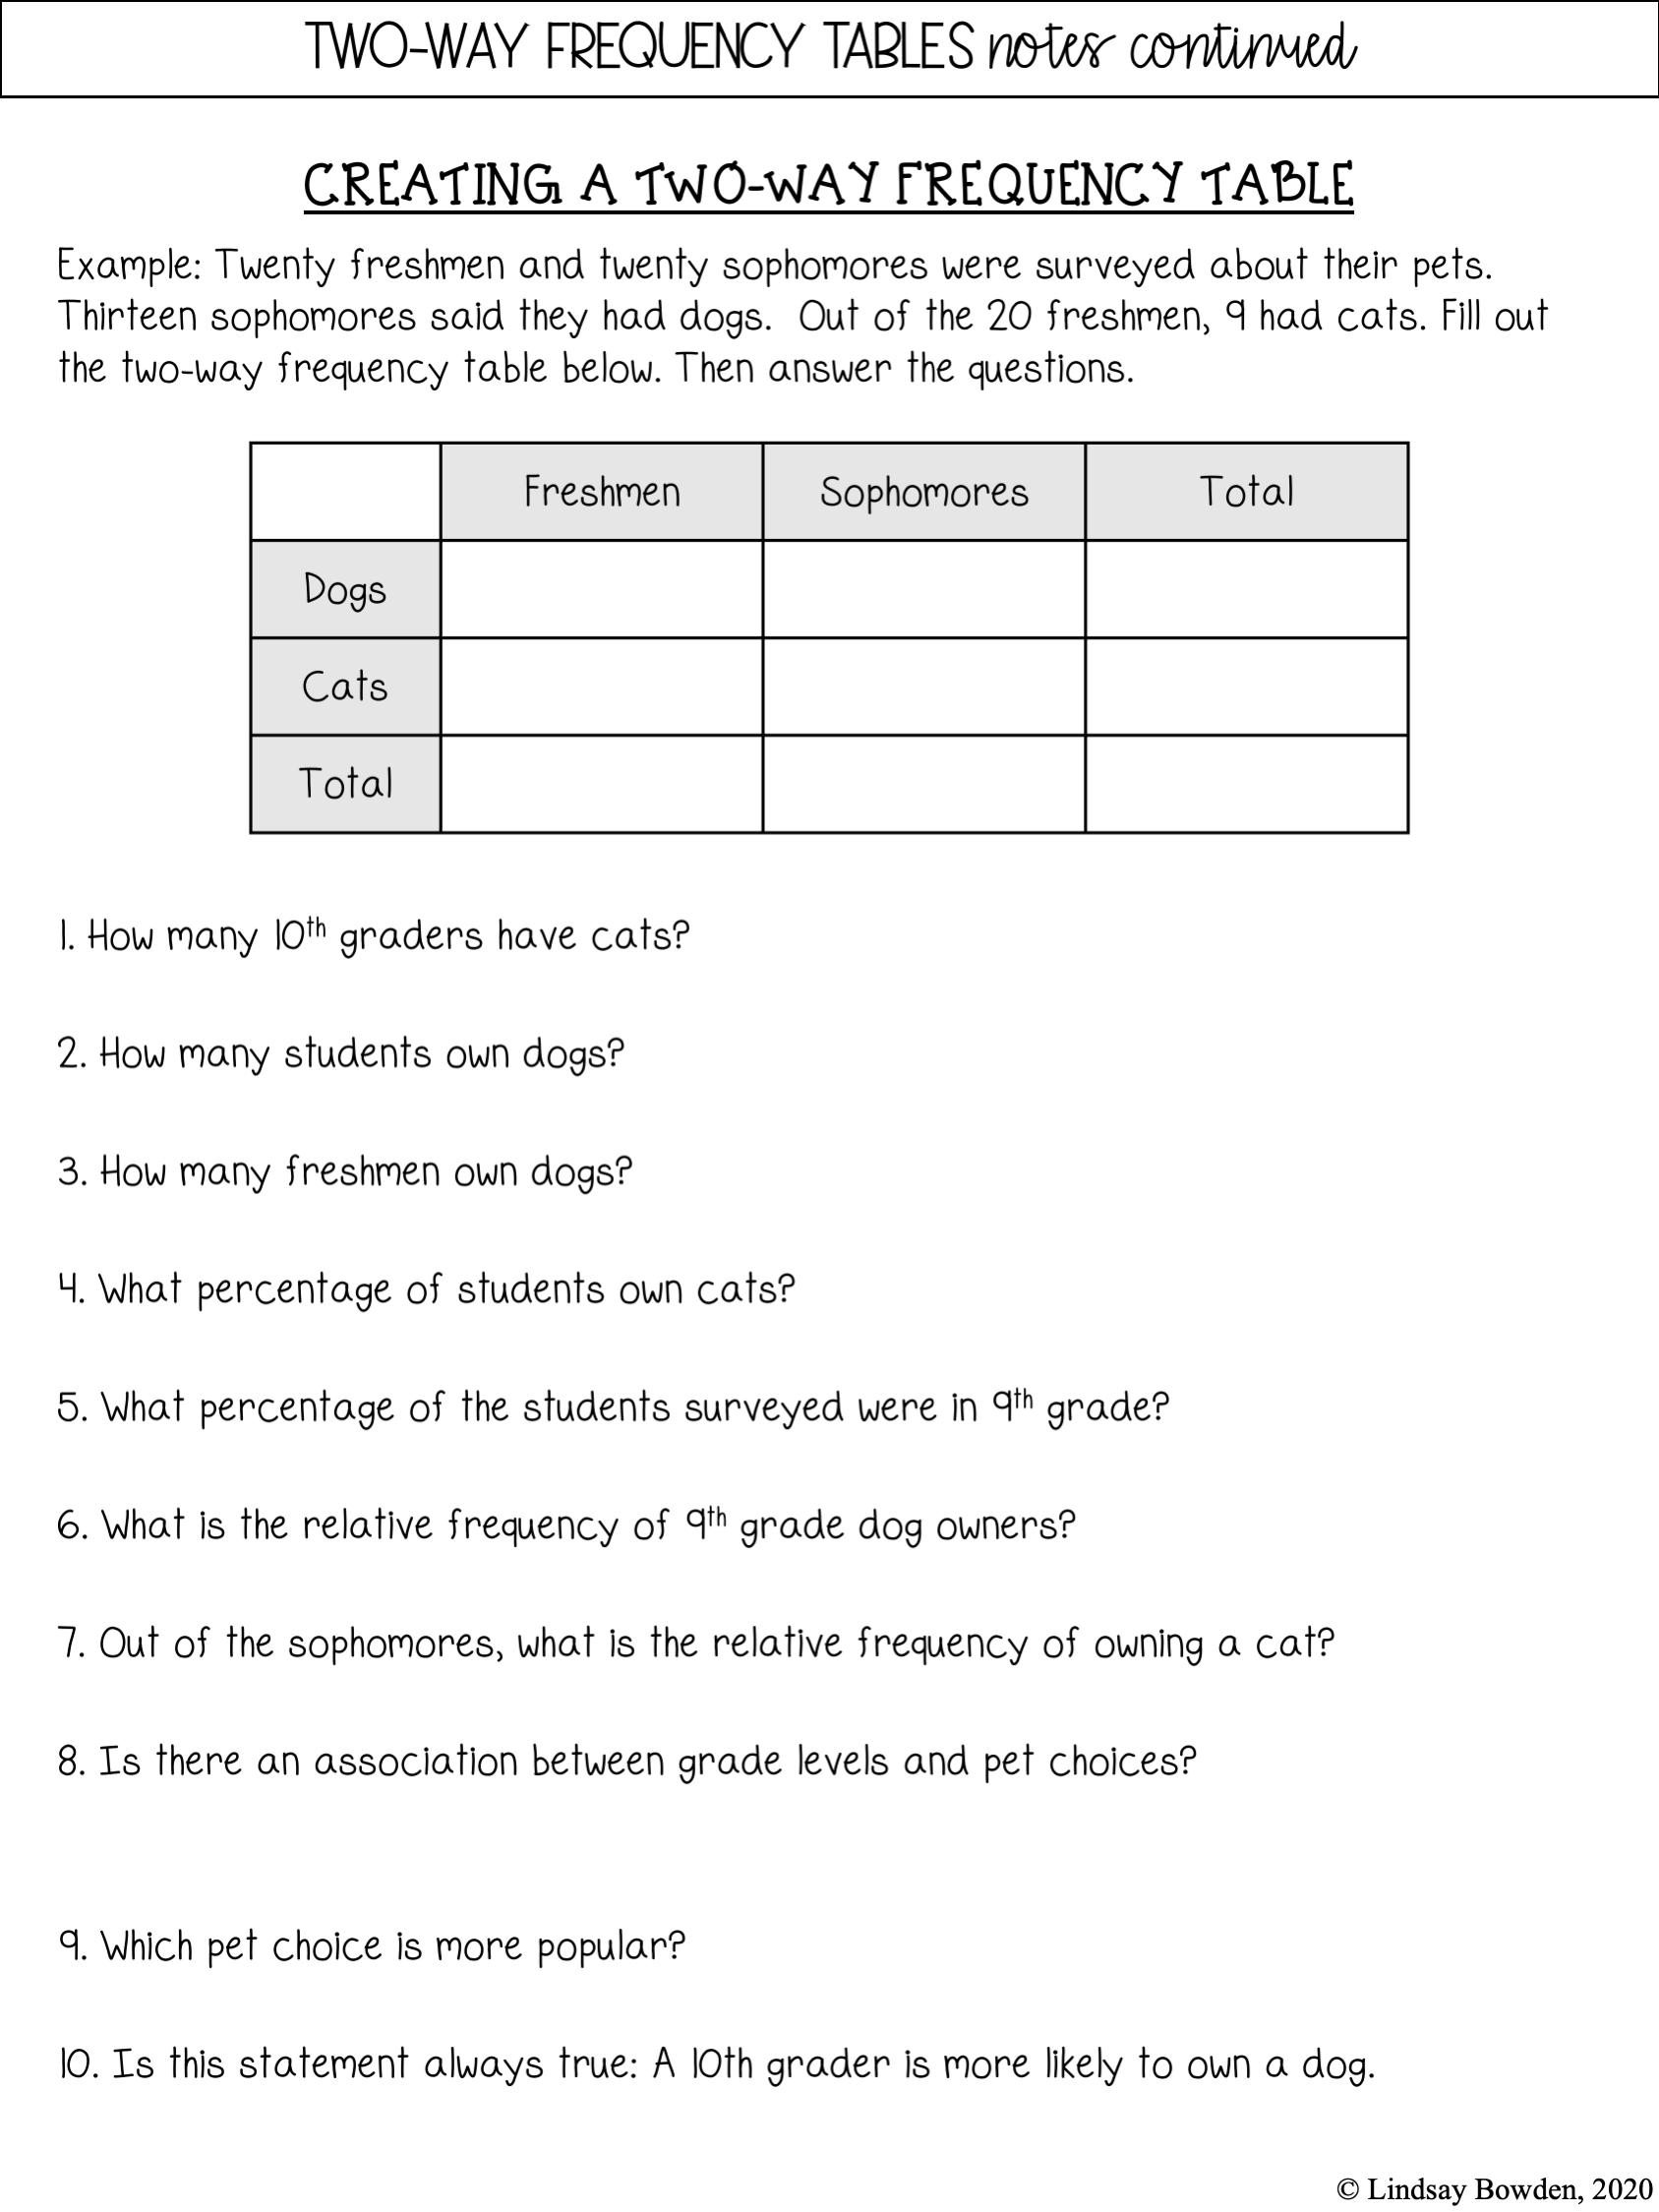 Two-Way Frequency Tables Notes and Worksheets - Lindsay Bowden Throughout Two Way Frequency Table Worksheet